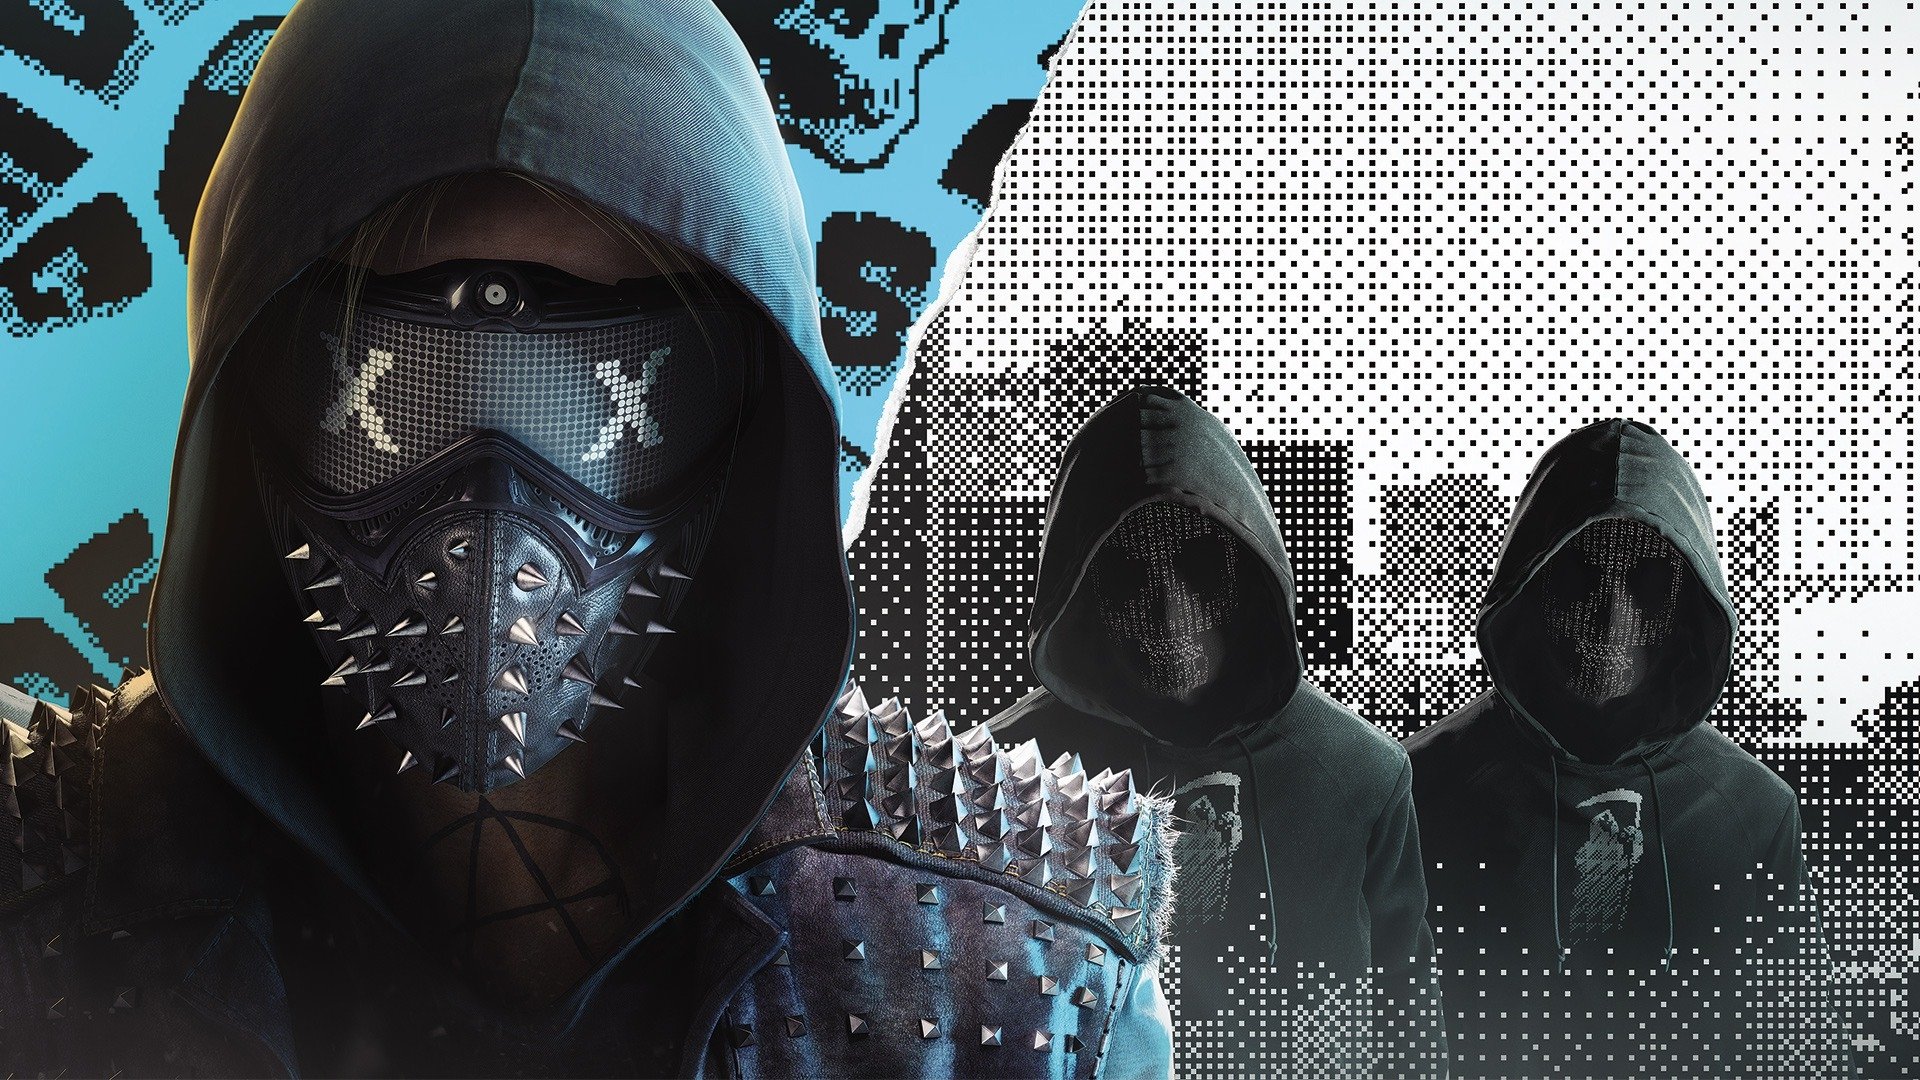 How to download watch dogs 2 pc with samsung - processlo